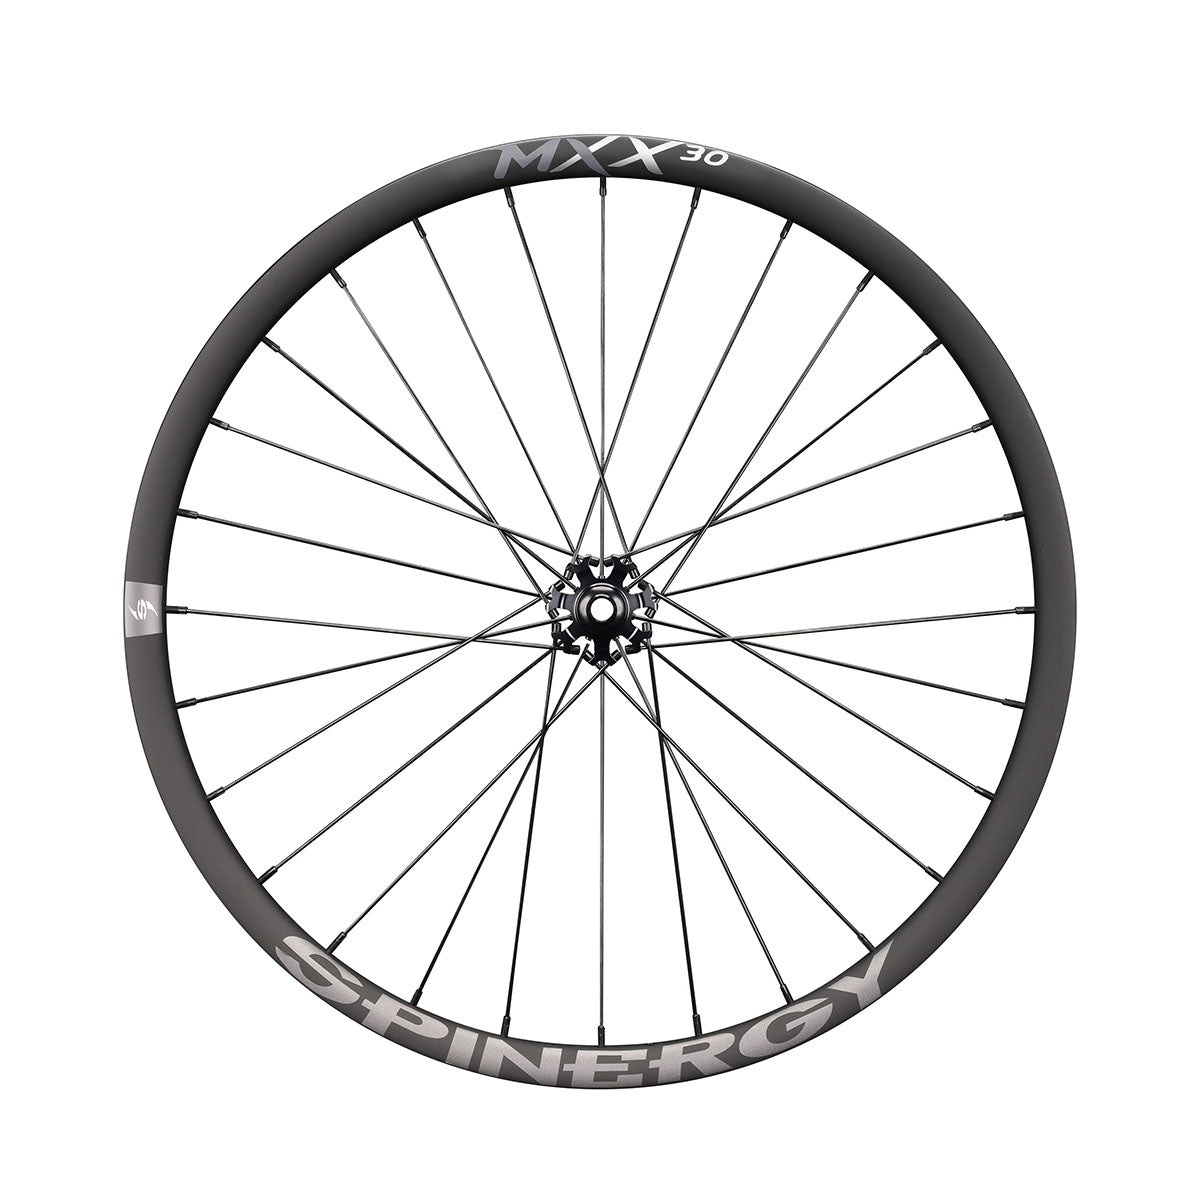 SPINERGY MXX30 Front Wheel for Mountain Bikes (Improved "44" Hub)